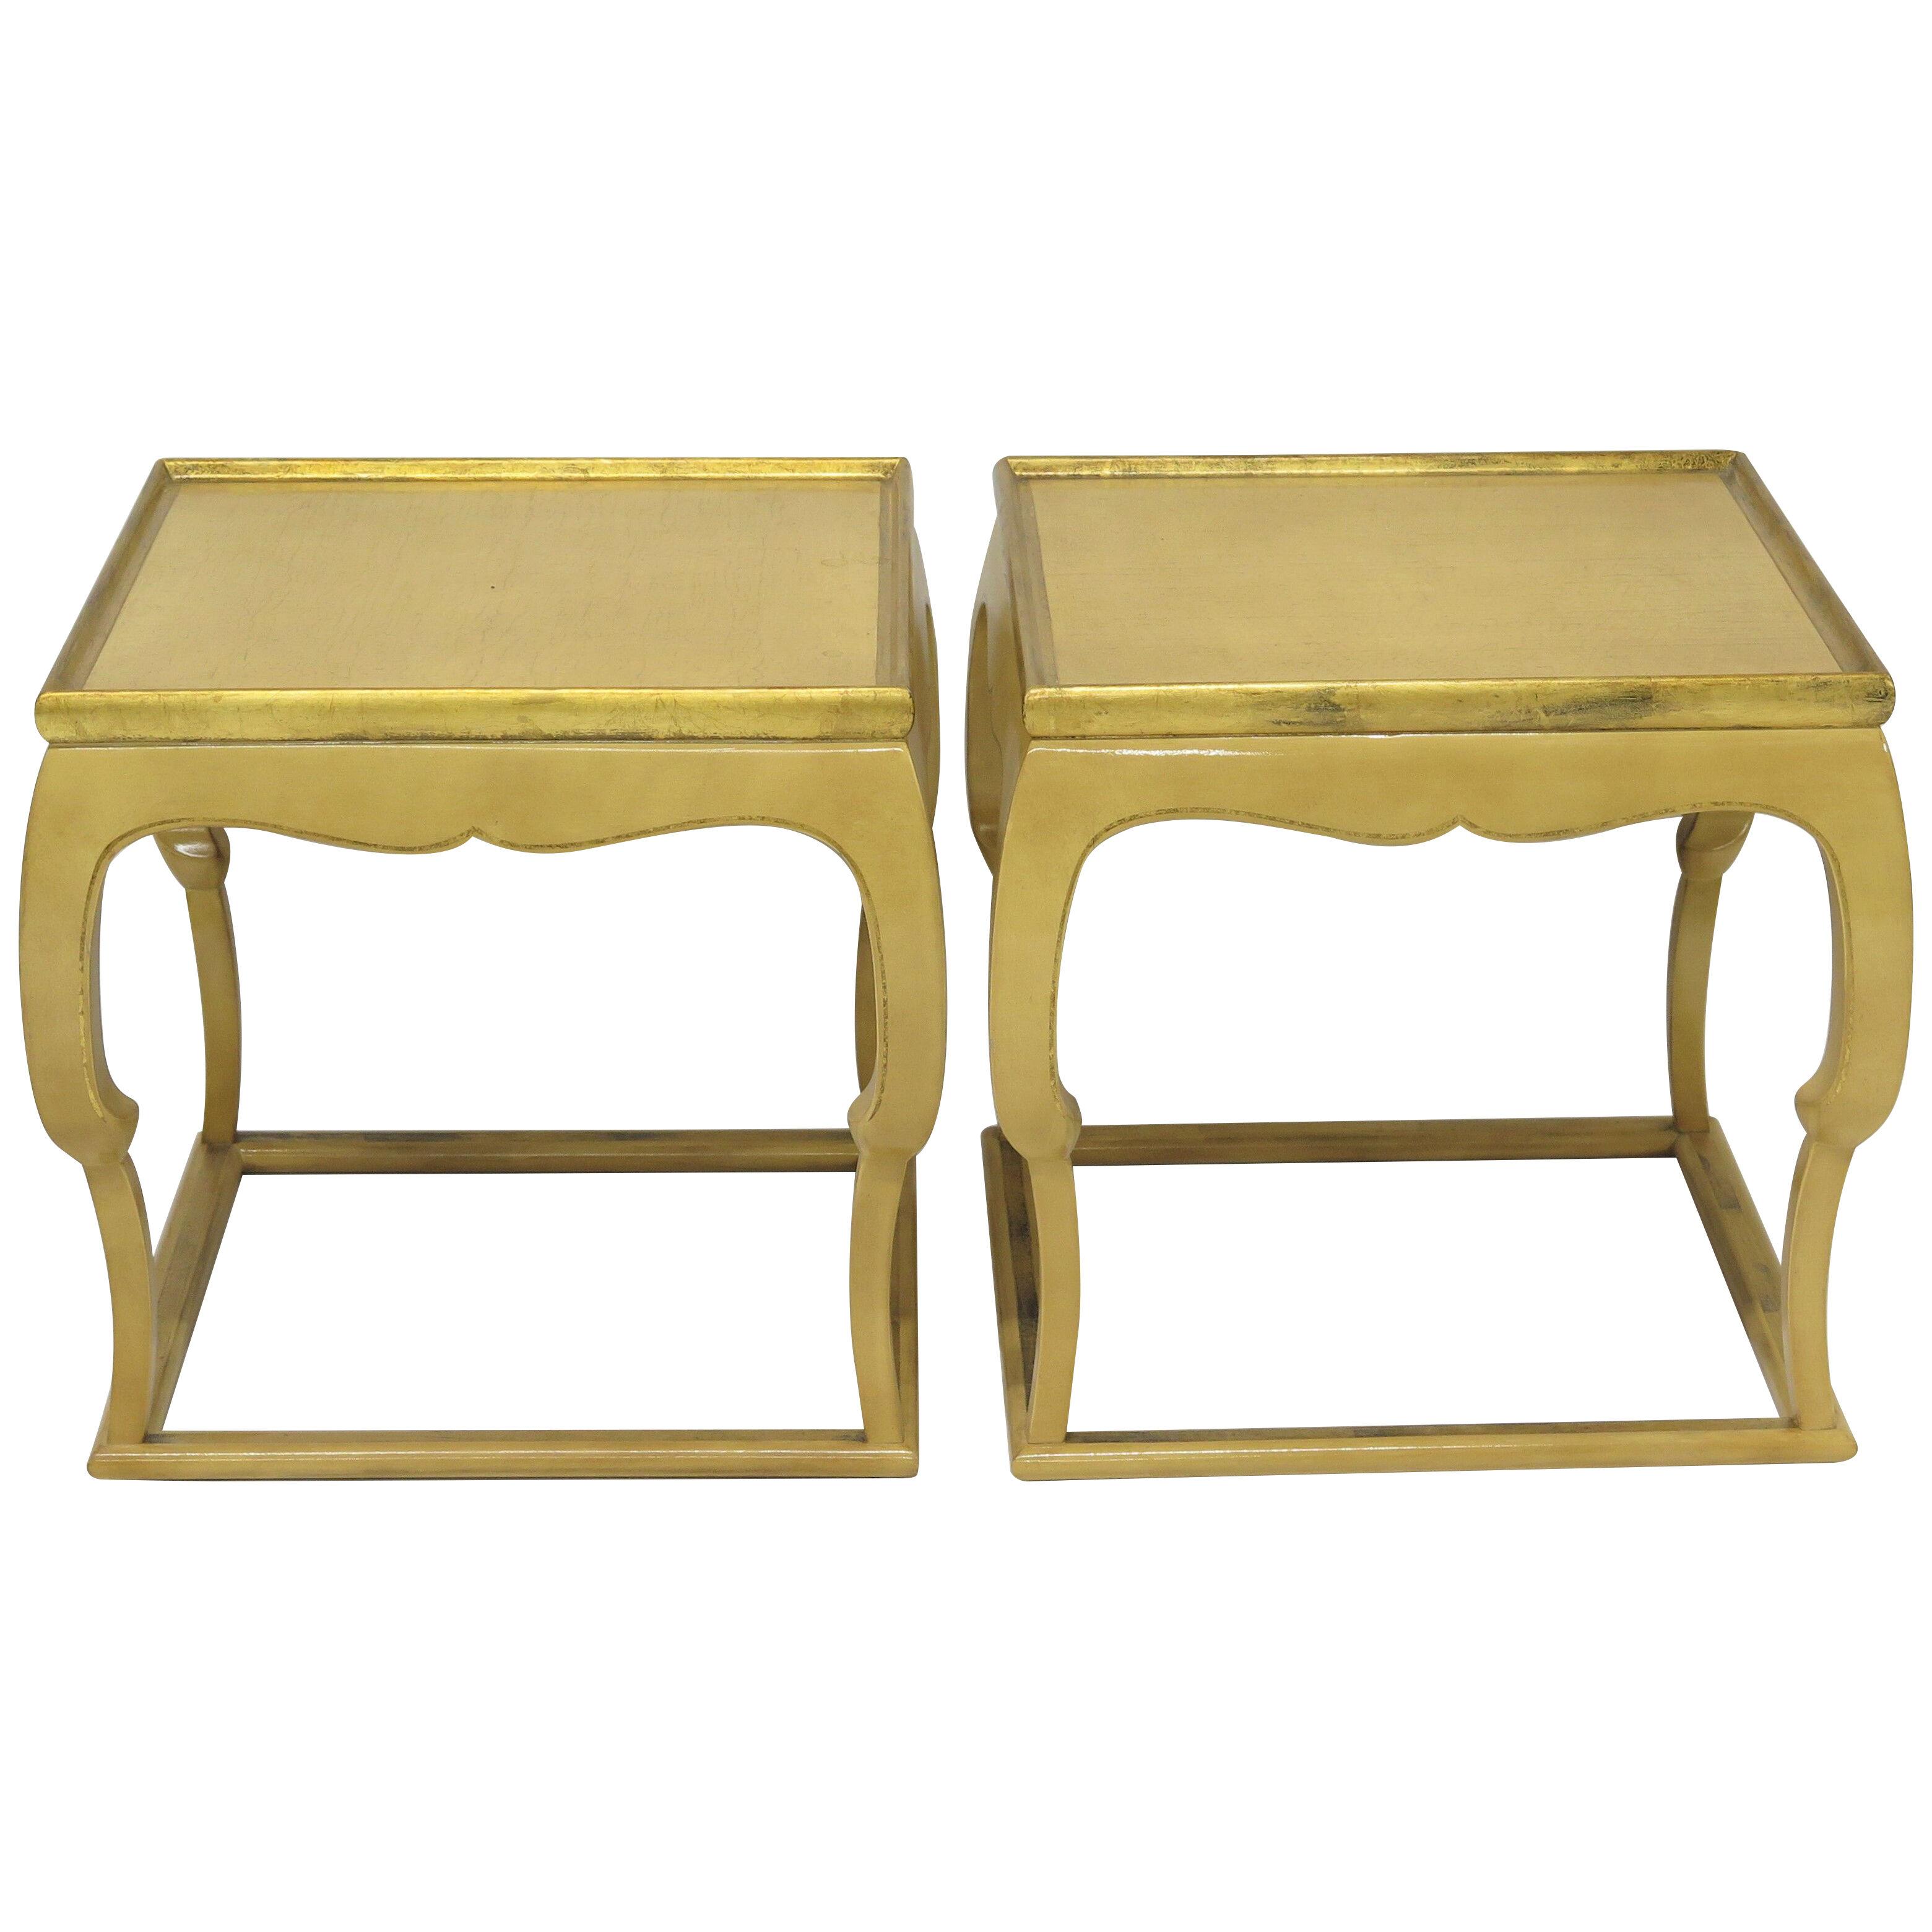 Pair of Lacquered Tables by Atelier Midavaine Paris